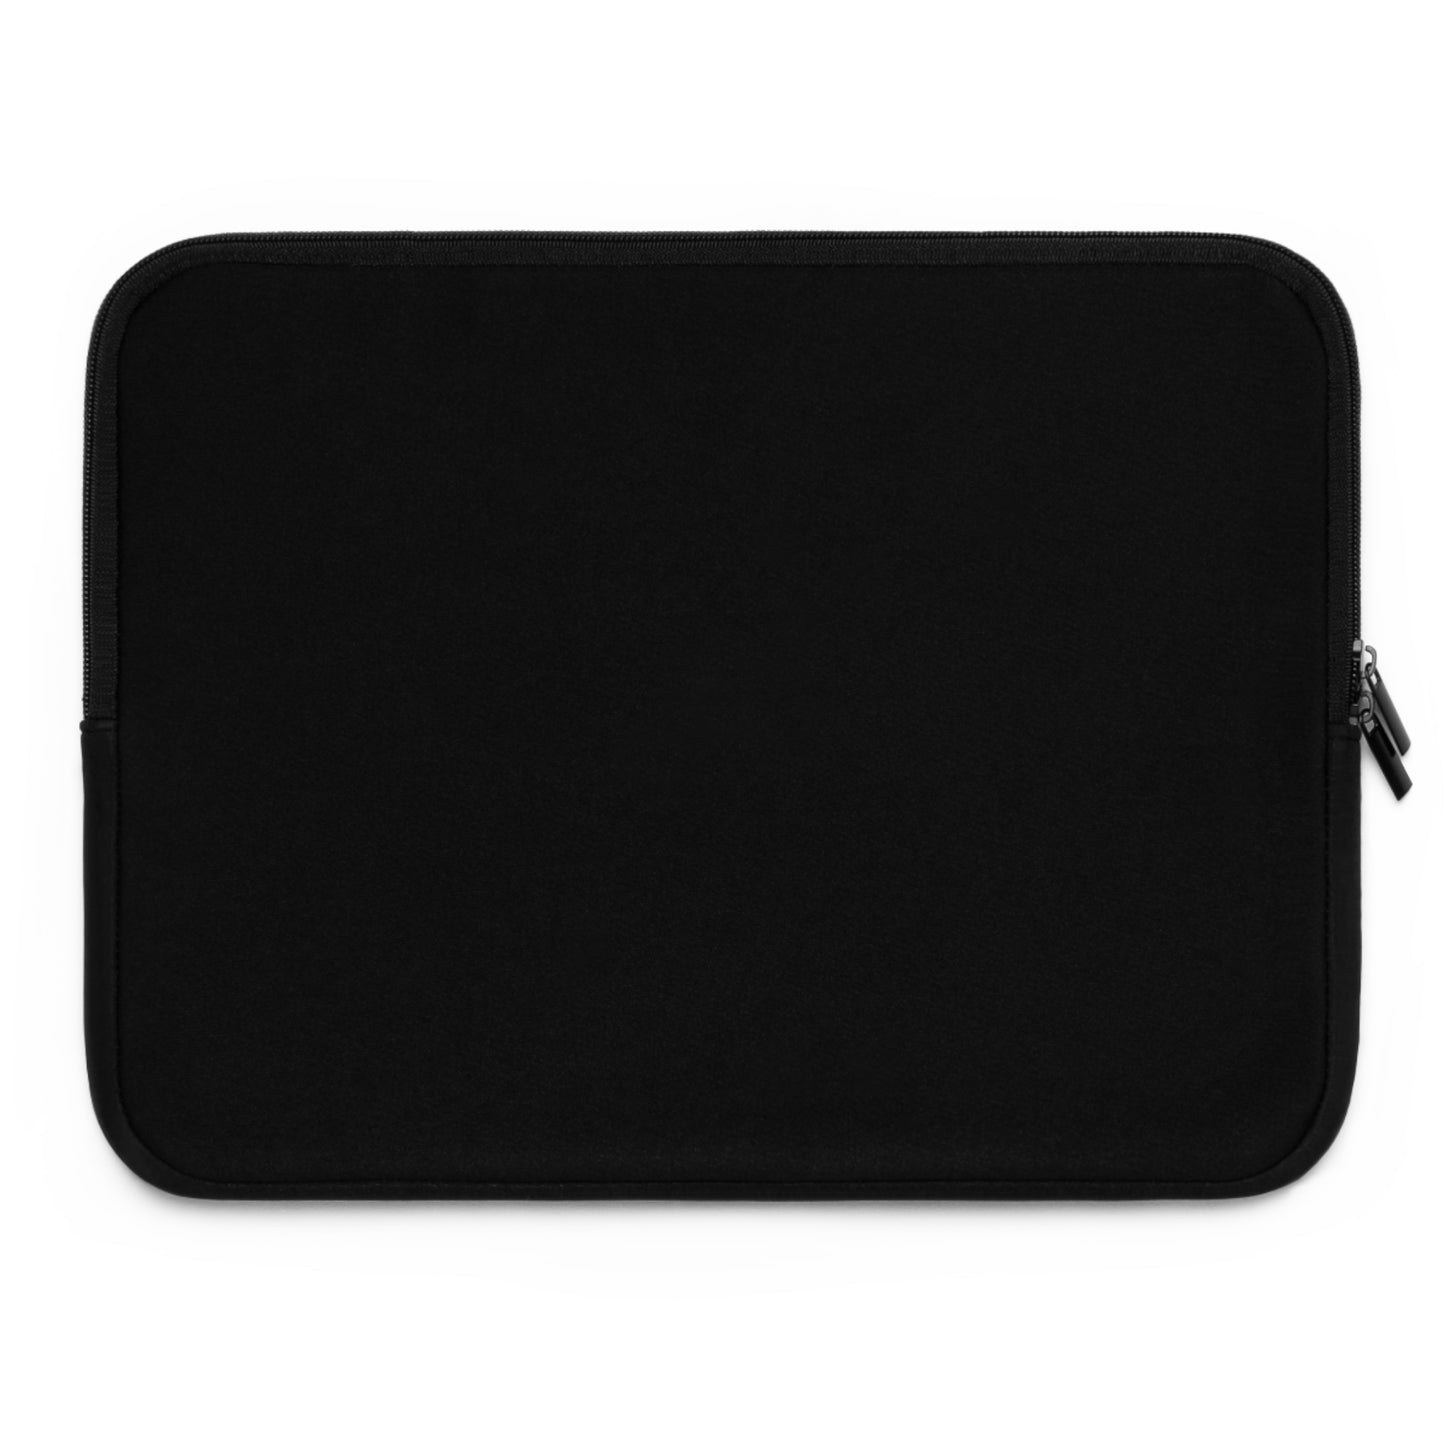 The Memory Of Troy Laptop Sleeve